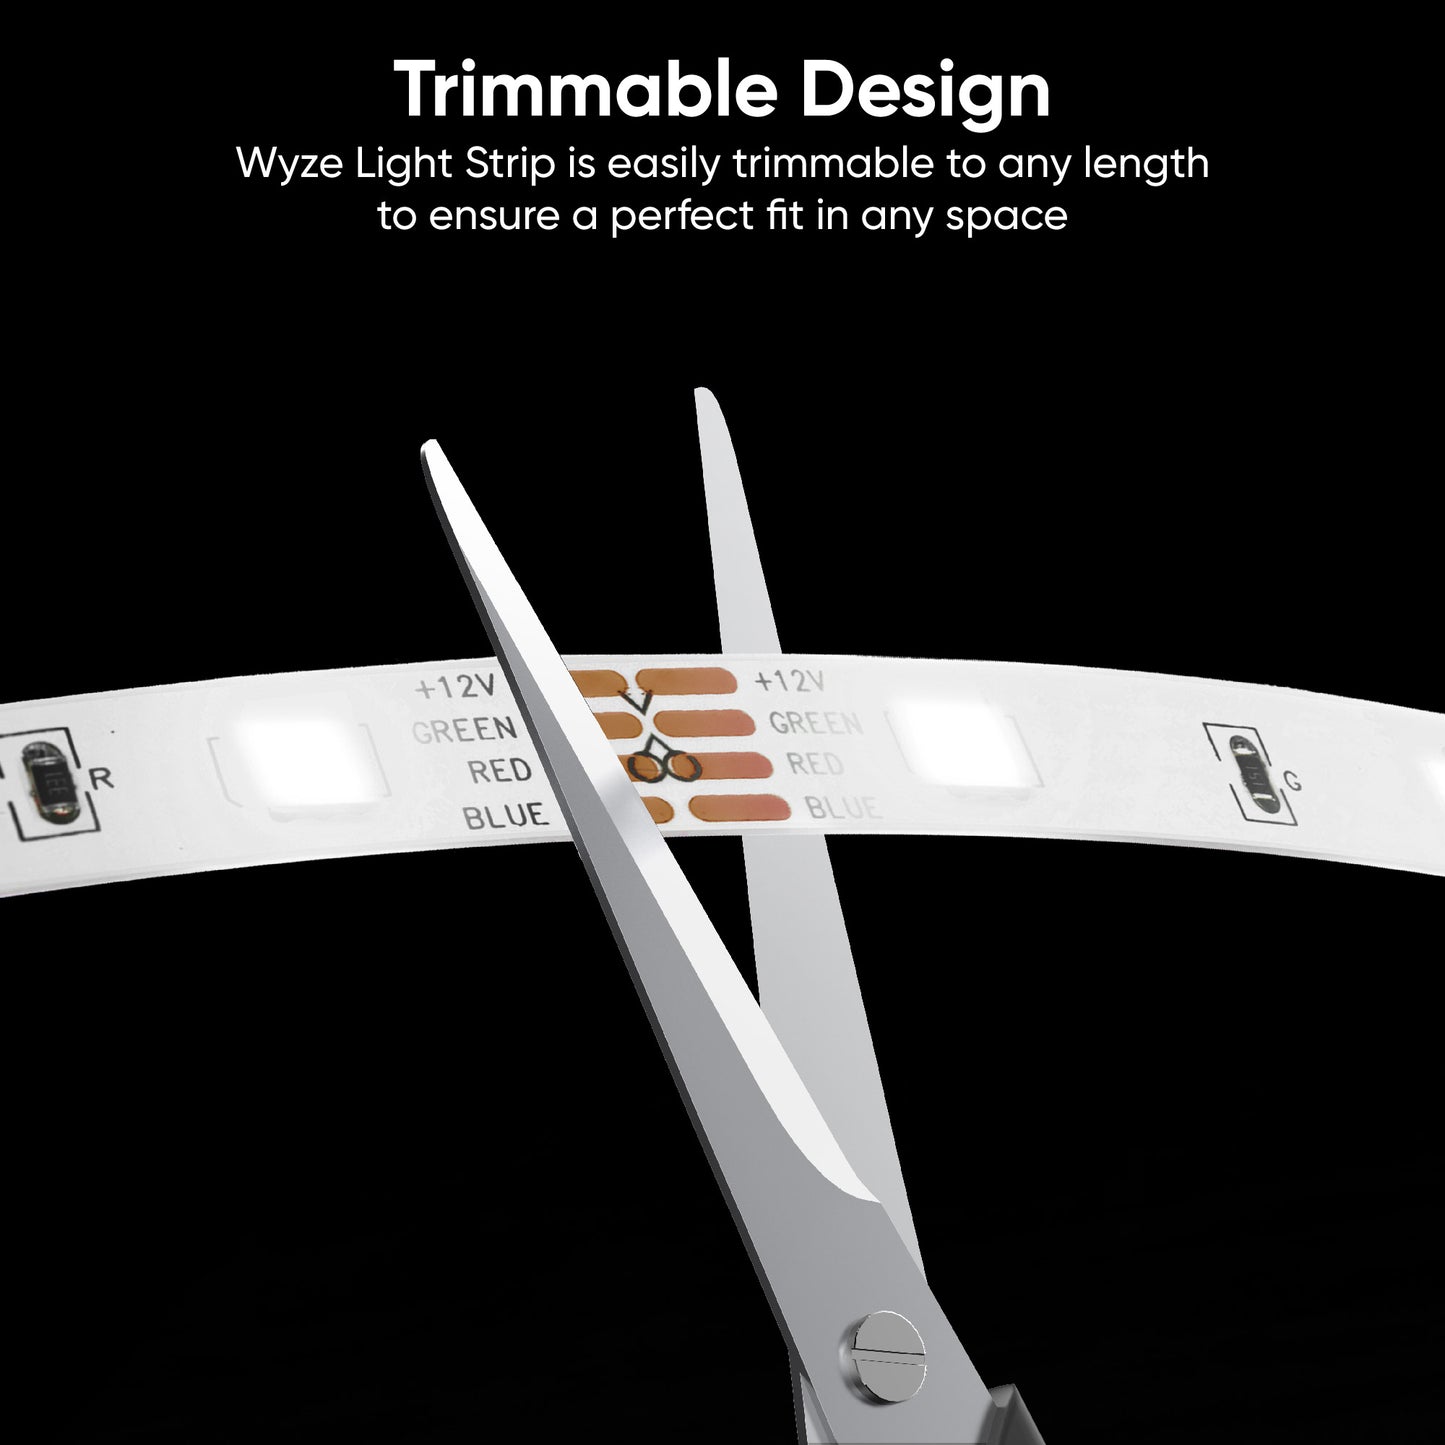 A pair of scissors cutting the light strip. Black text overlay that says "Precise customization to fit your space."